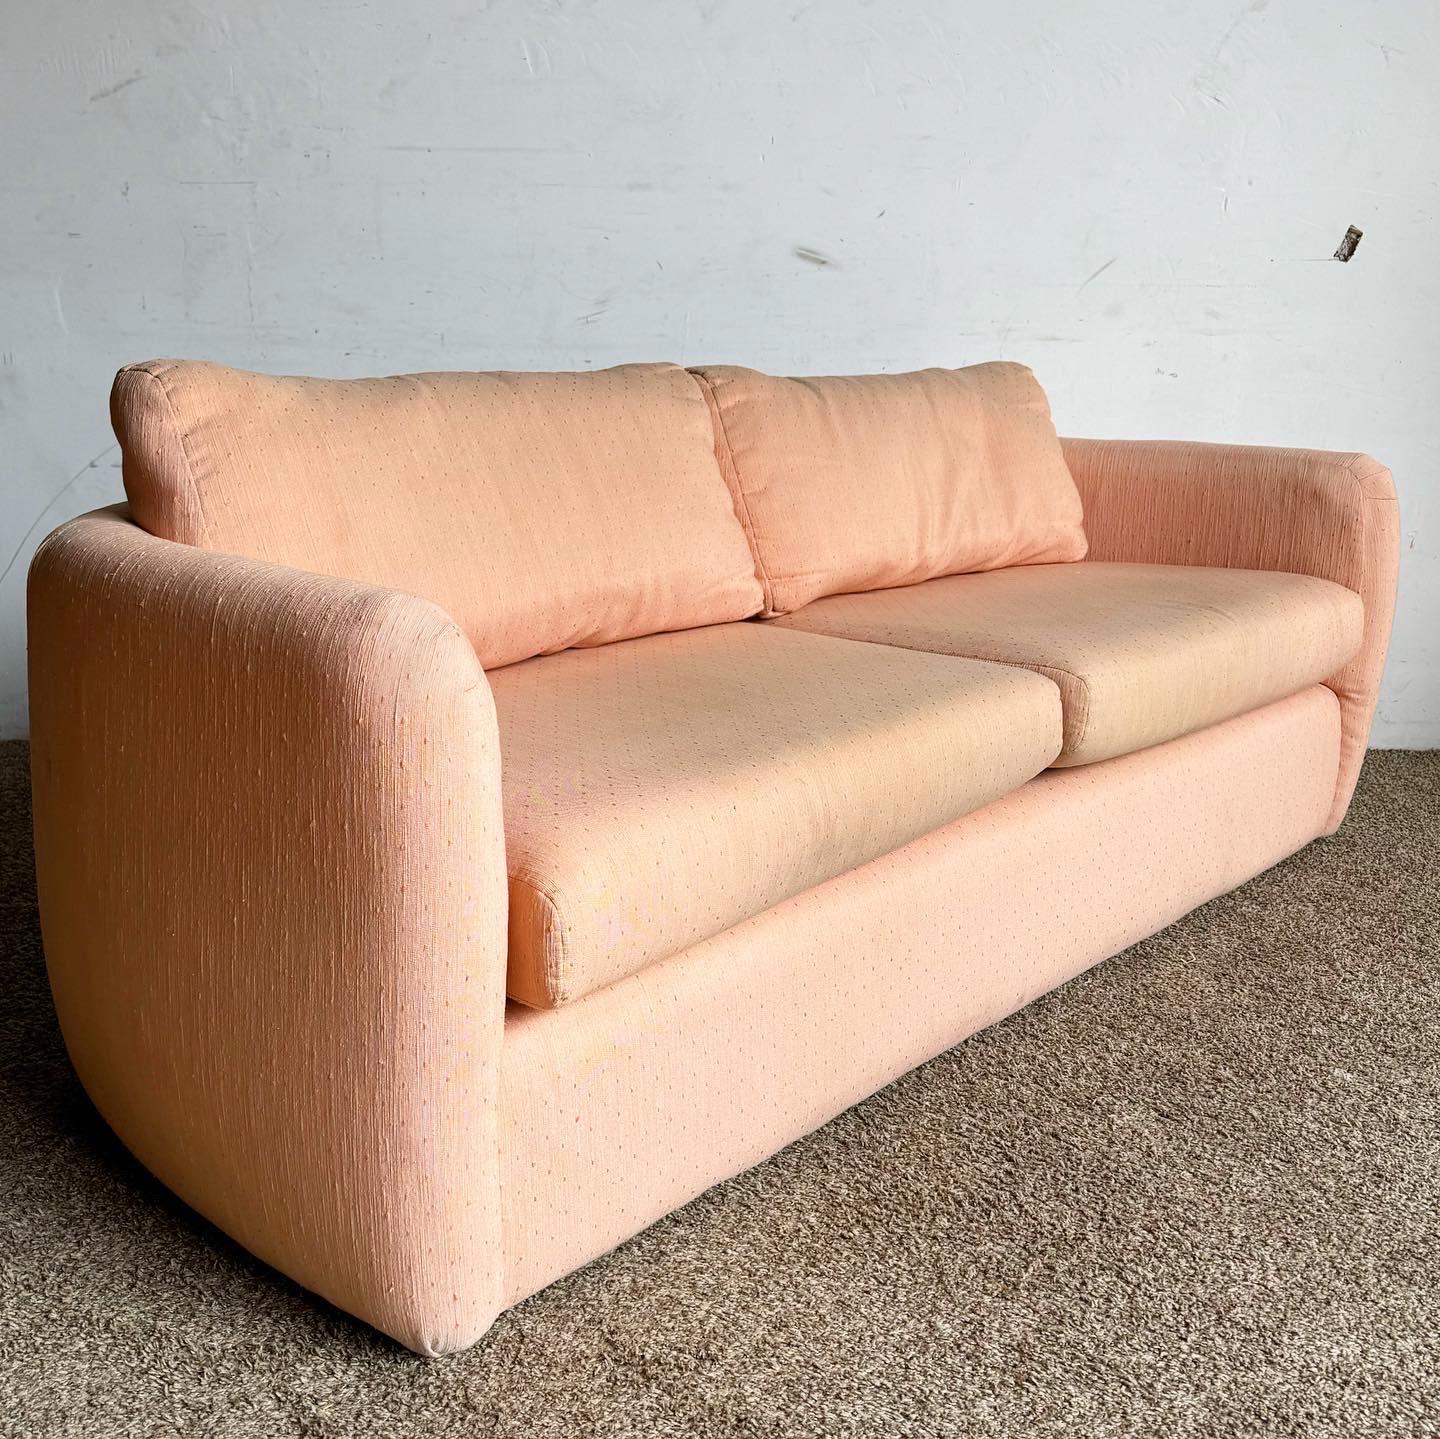 The Postmodern Pink Sofa by Thayer Coggin is a vibrant addition to any contemporary setting. Its bold pink upholstery and minimalist design blend fun with sophistication, perfect for a stylish living space.
Discoloration and wear to the fabric as